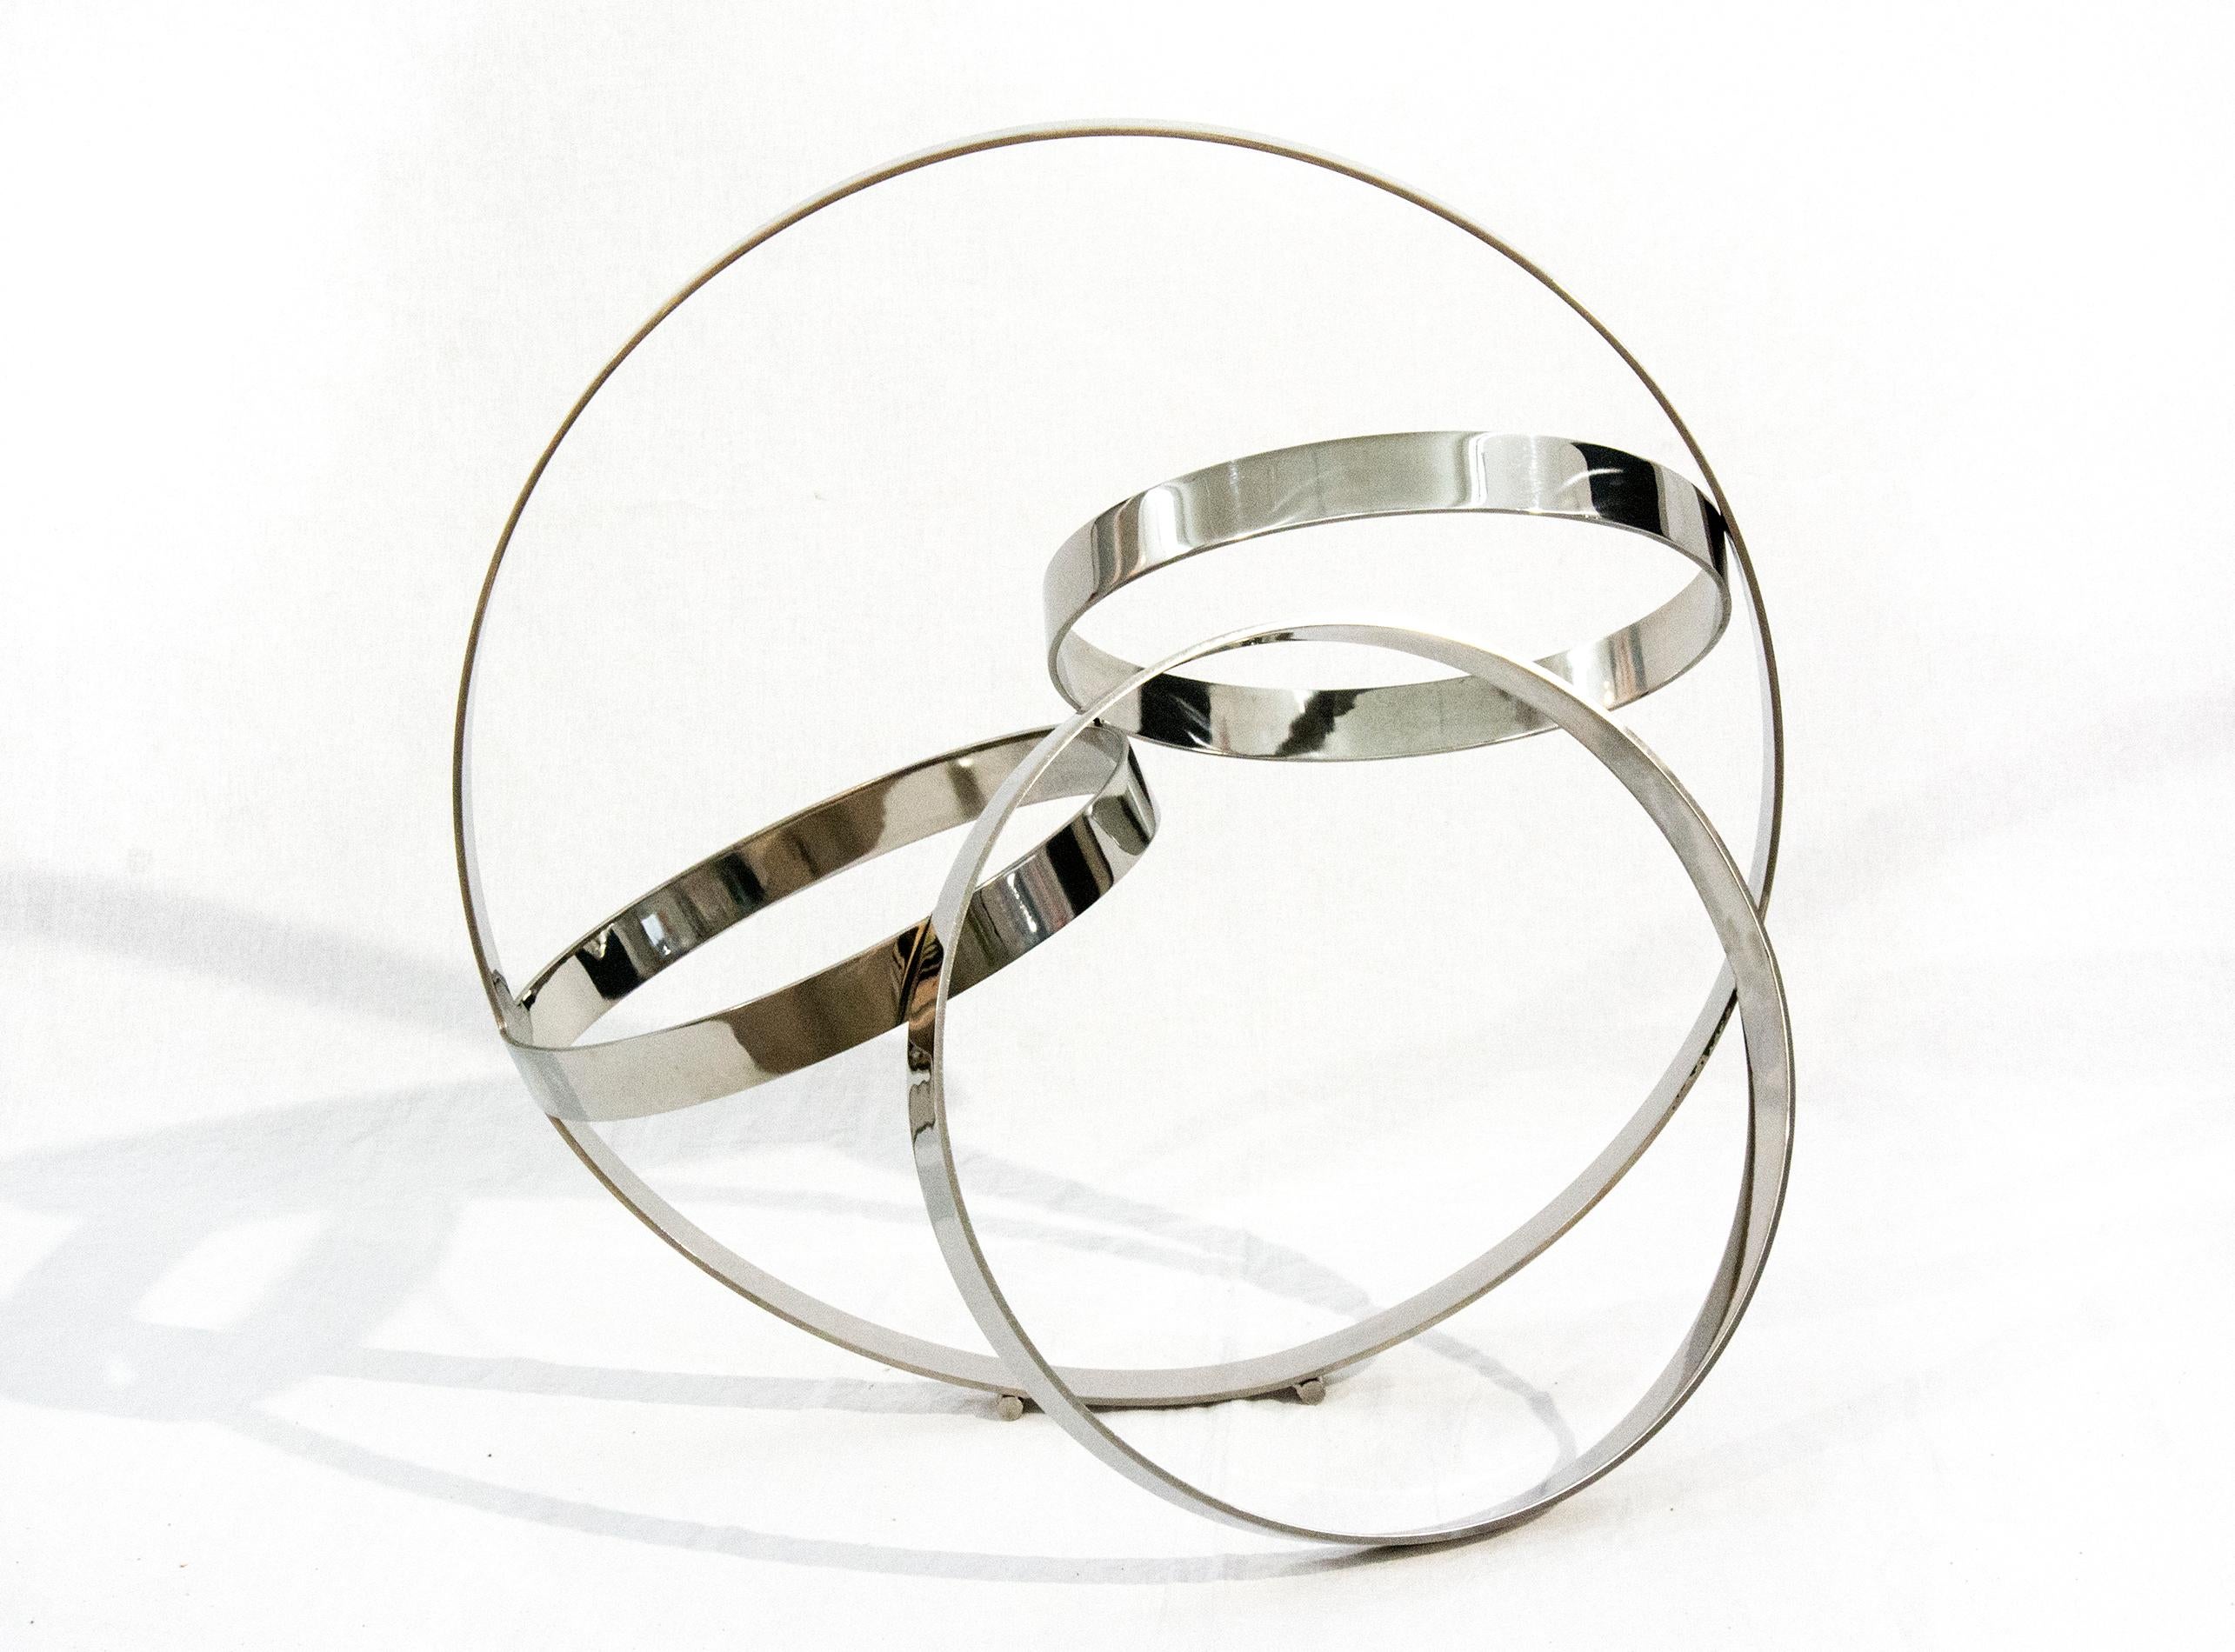 Philippe Pallafray Abstract Sculpture - Four Ring Polished Stainless Steel Temps Zero - geometric, modern, sculpture